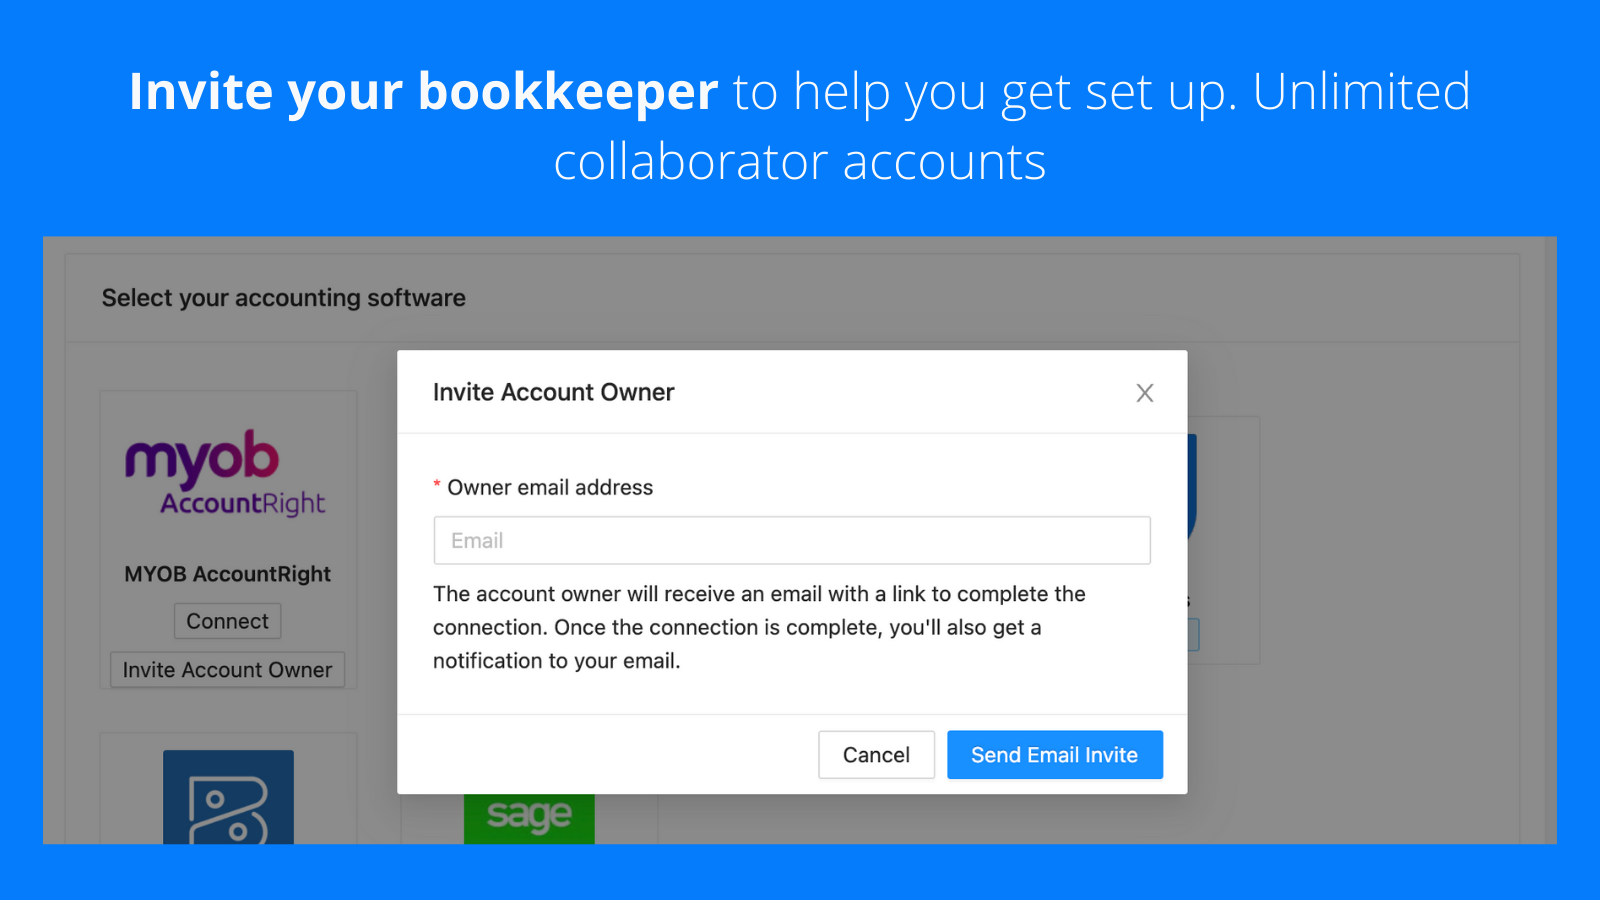 easily invite your accountant or bookeeper to help set up, free